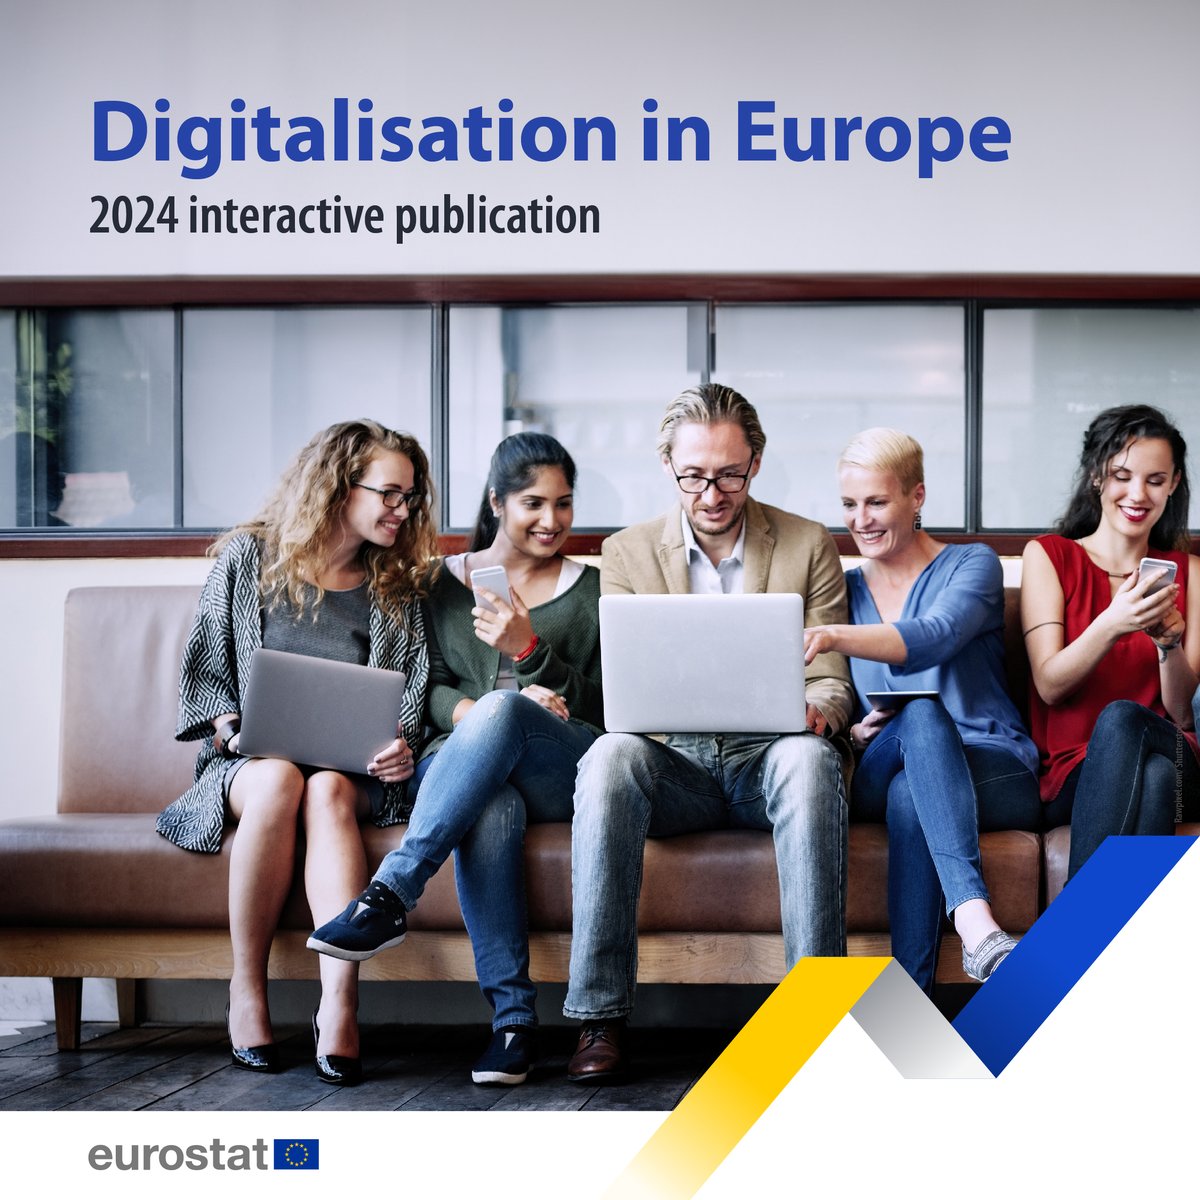 Digitalisation in Europe - 2024 edition out now 🌐 💻 Did you know that in 2023, 91% of people in the EU used the internet❓ Learn how #digitalisation is shaping our future in Eurostat's interactive publication ➡️ europa.eu/!yM9JpY